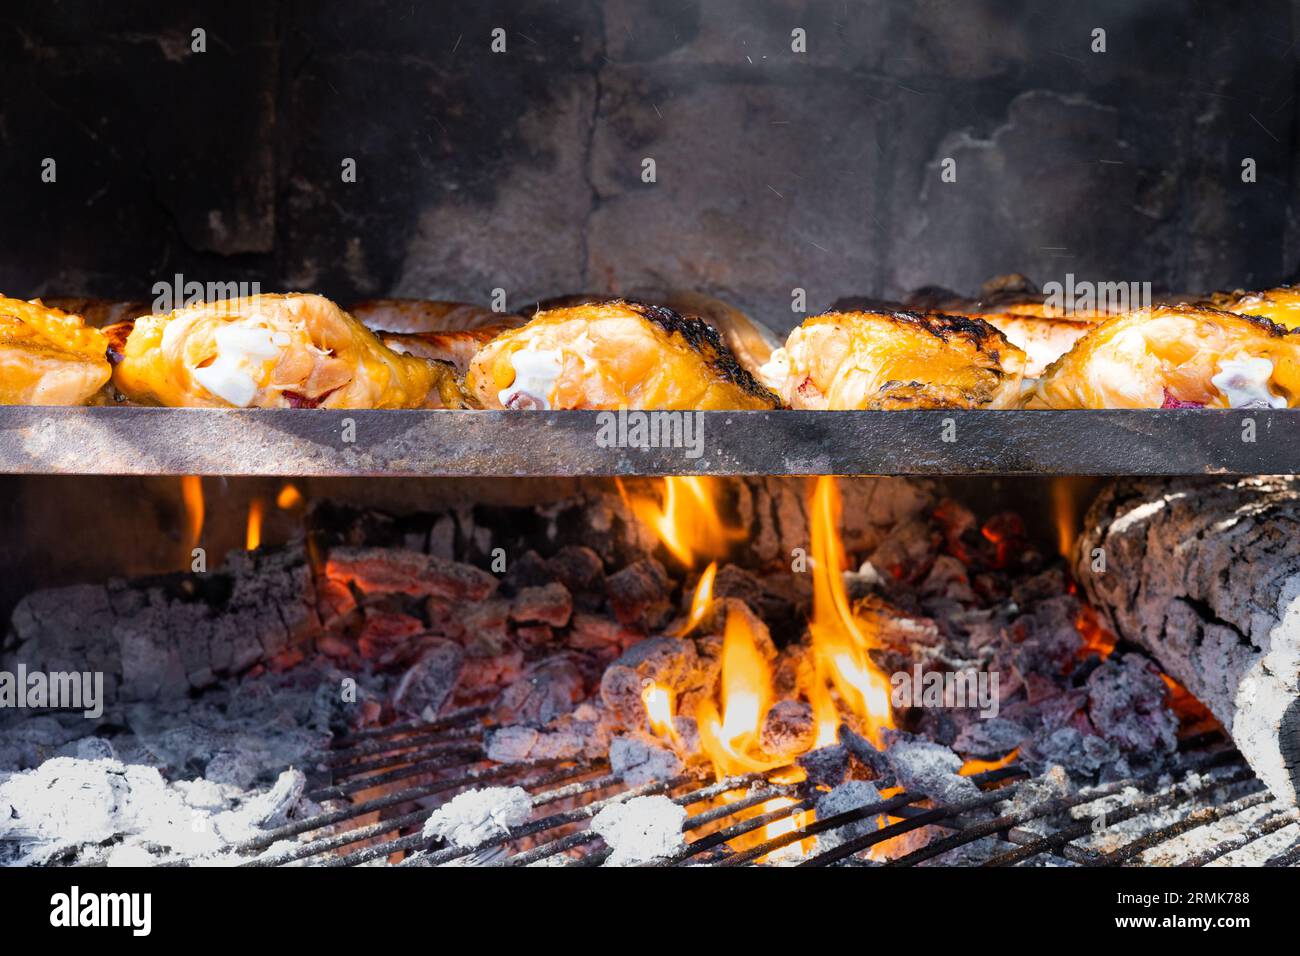 Barbecue grill pit with hot coals cooking chicken. Glowing and flaming charcoal briquettes for fire BBQ. Stock Photo